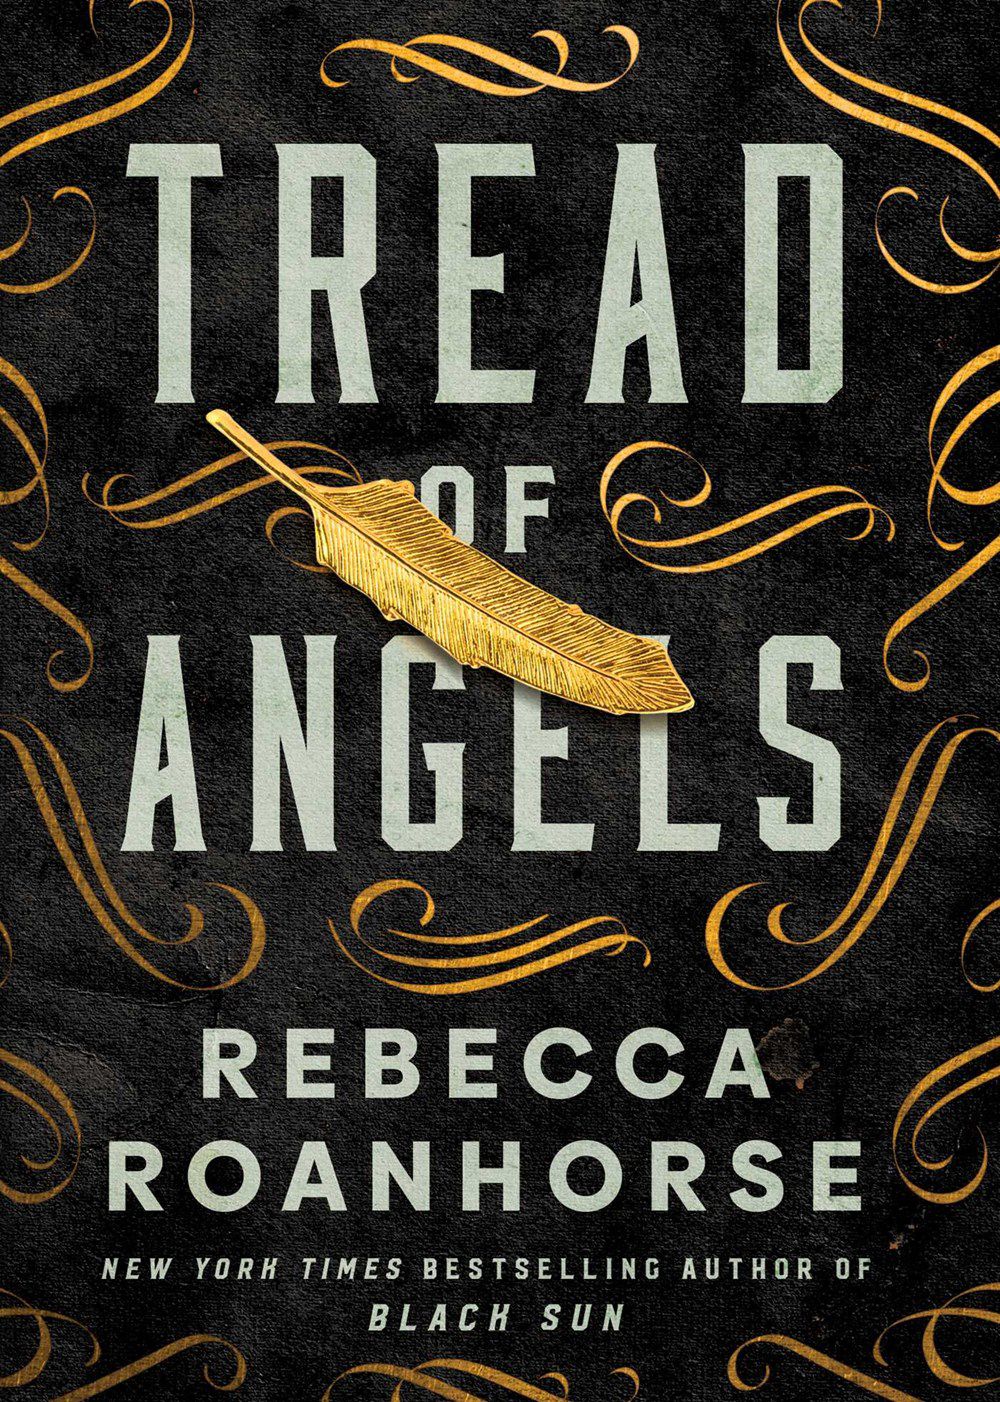 Cover art for Rebecca Roanhorse's Tread of Angels, featuring a gold feather